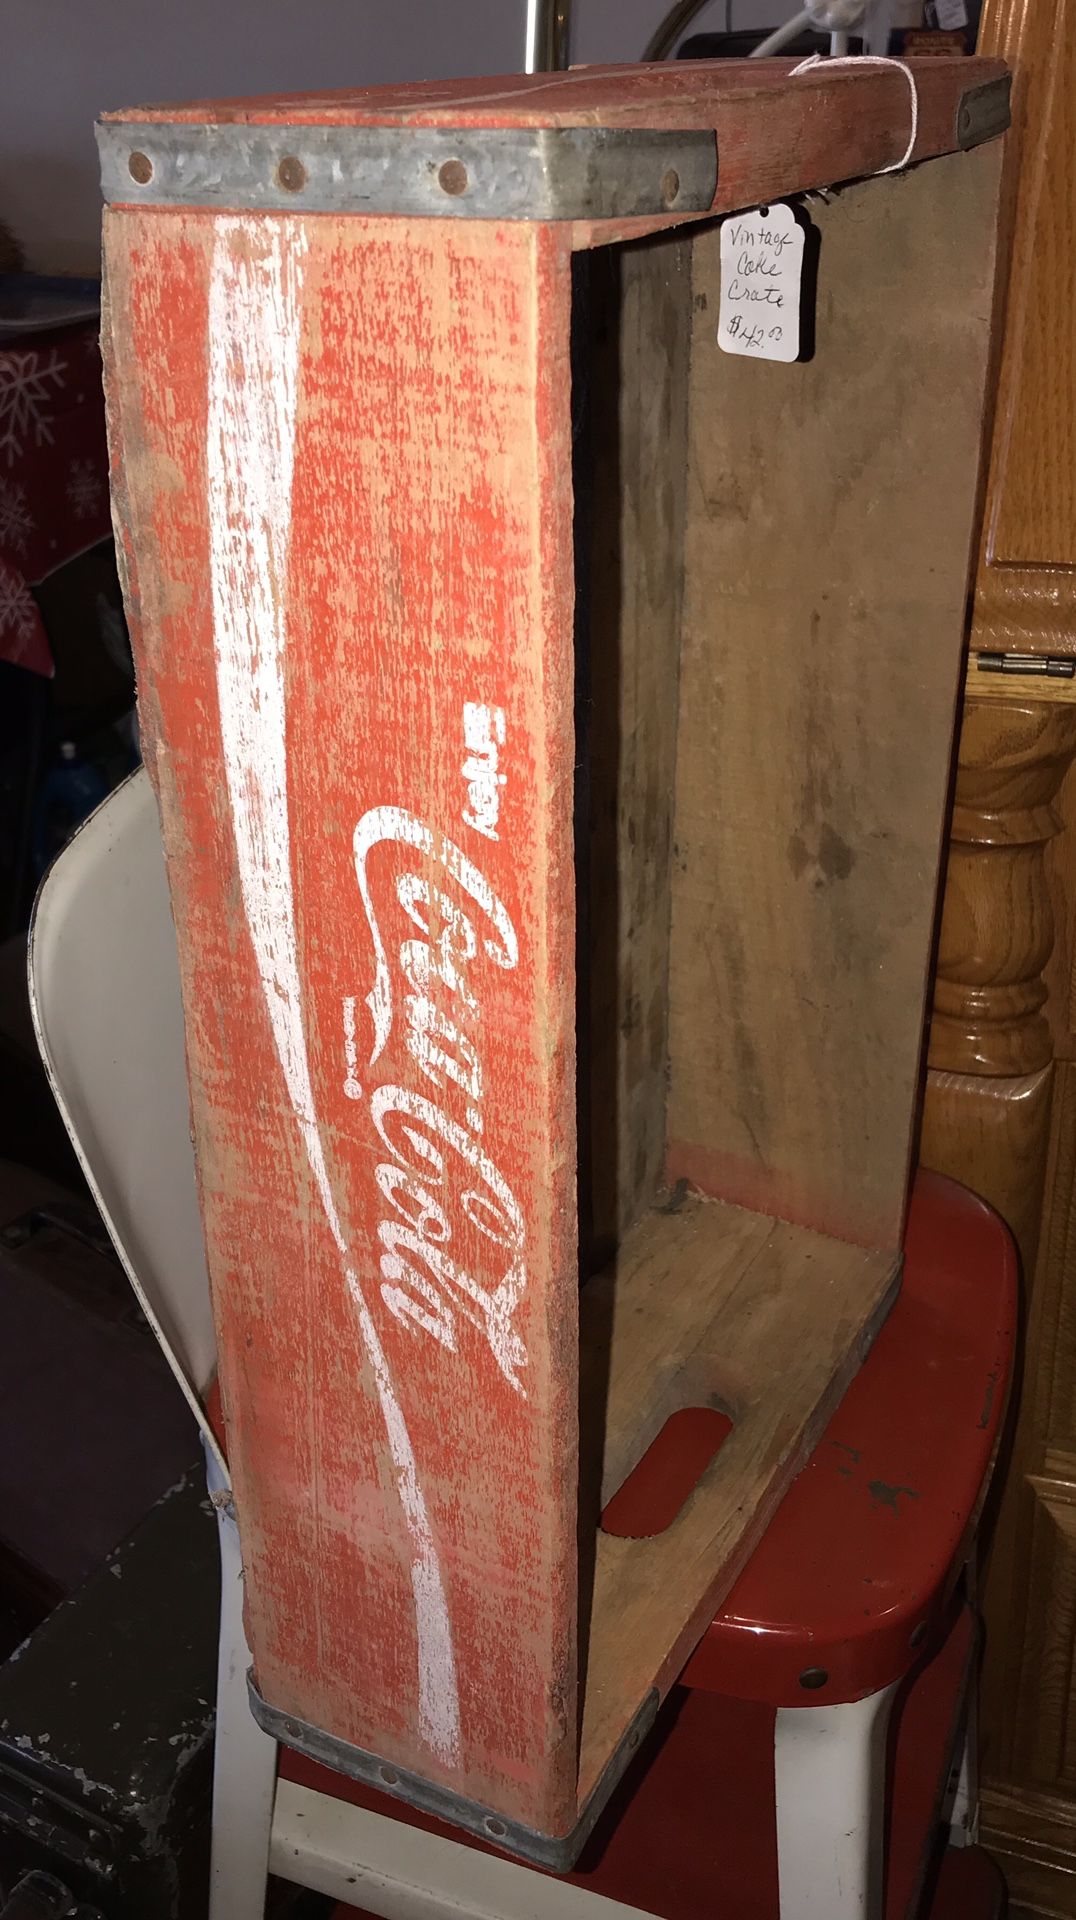 Coke Crate - Vintage Wooden Crate